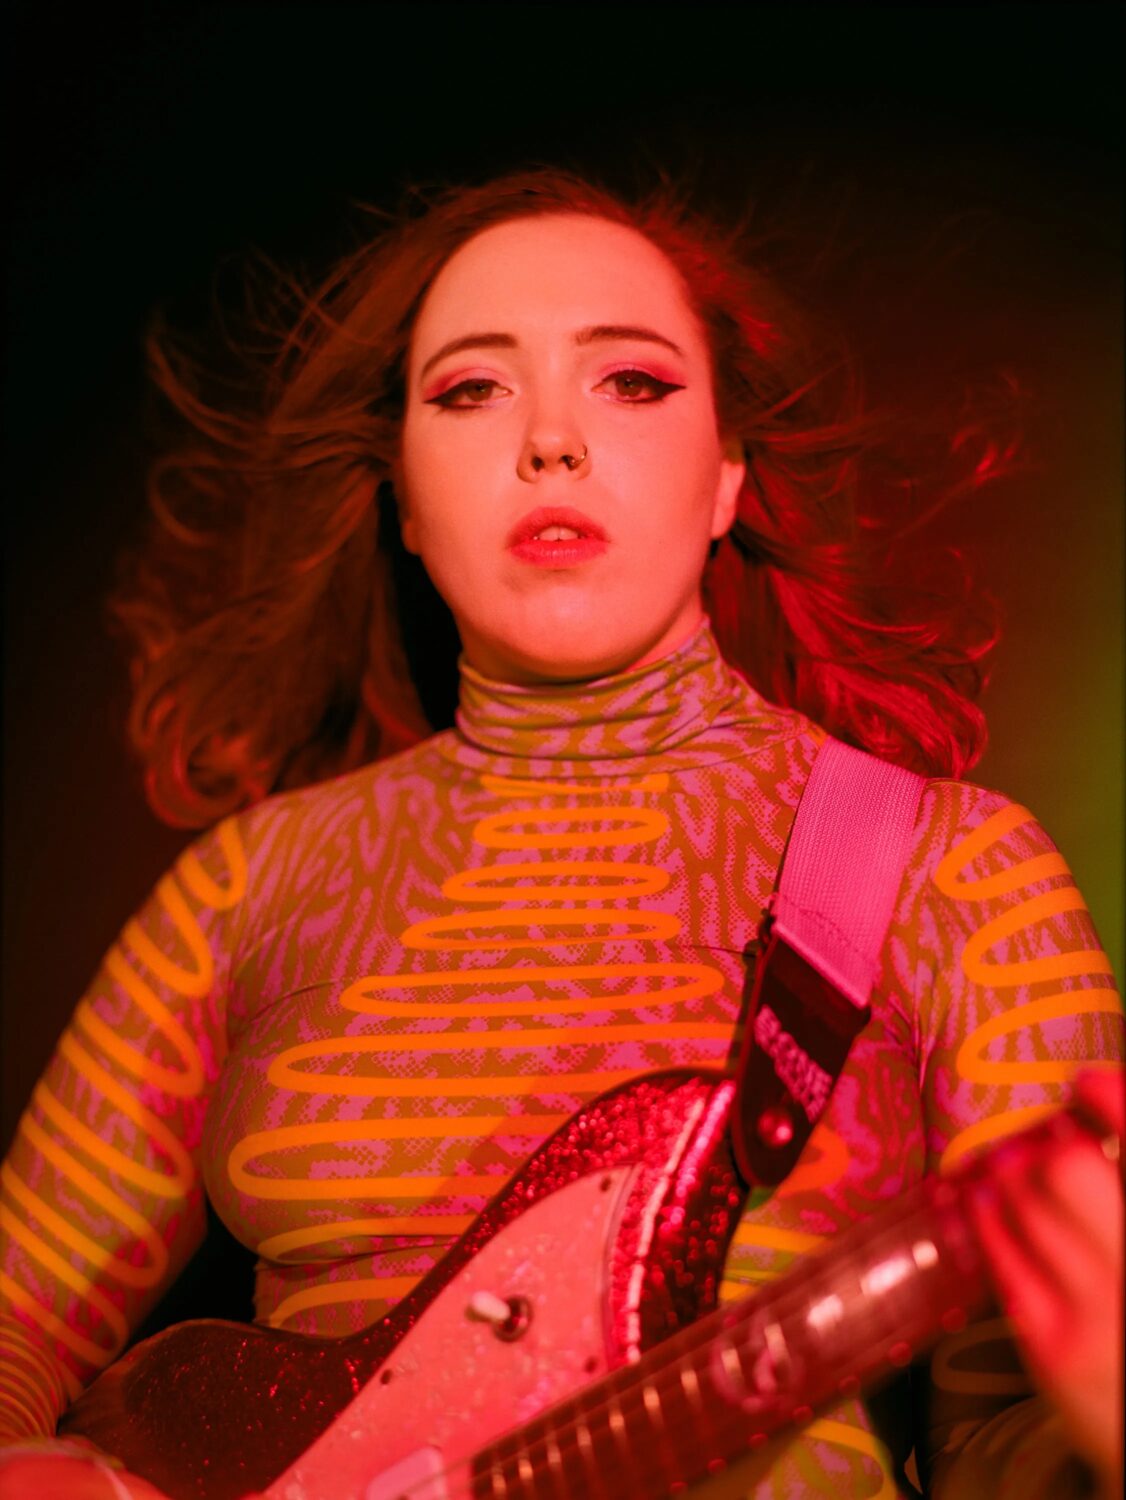 Woman wearing a geometric yellow patterned tight turtleneck shirt basks in red stage light and holds a guitar